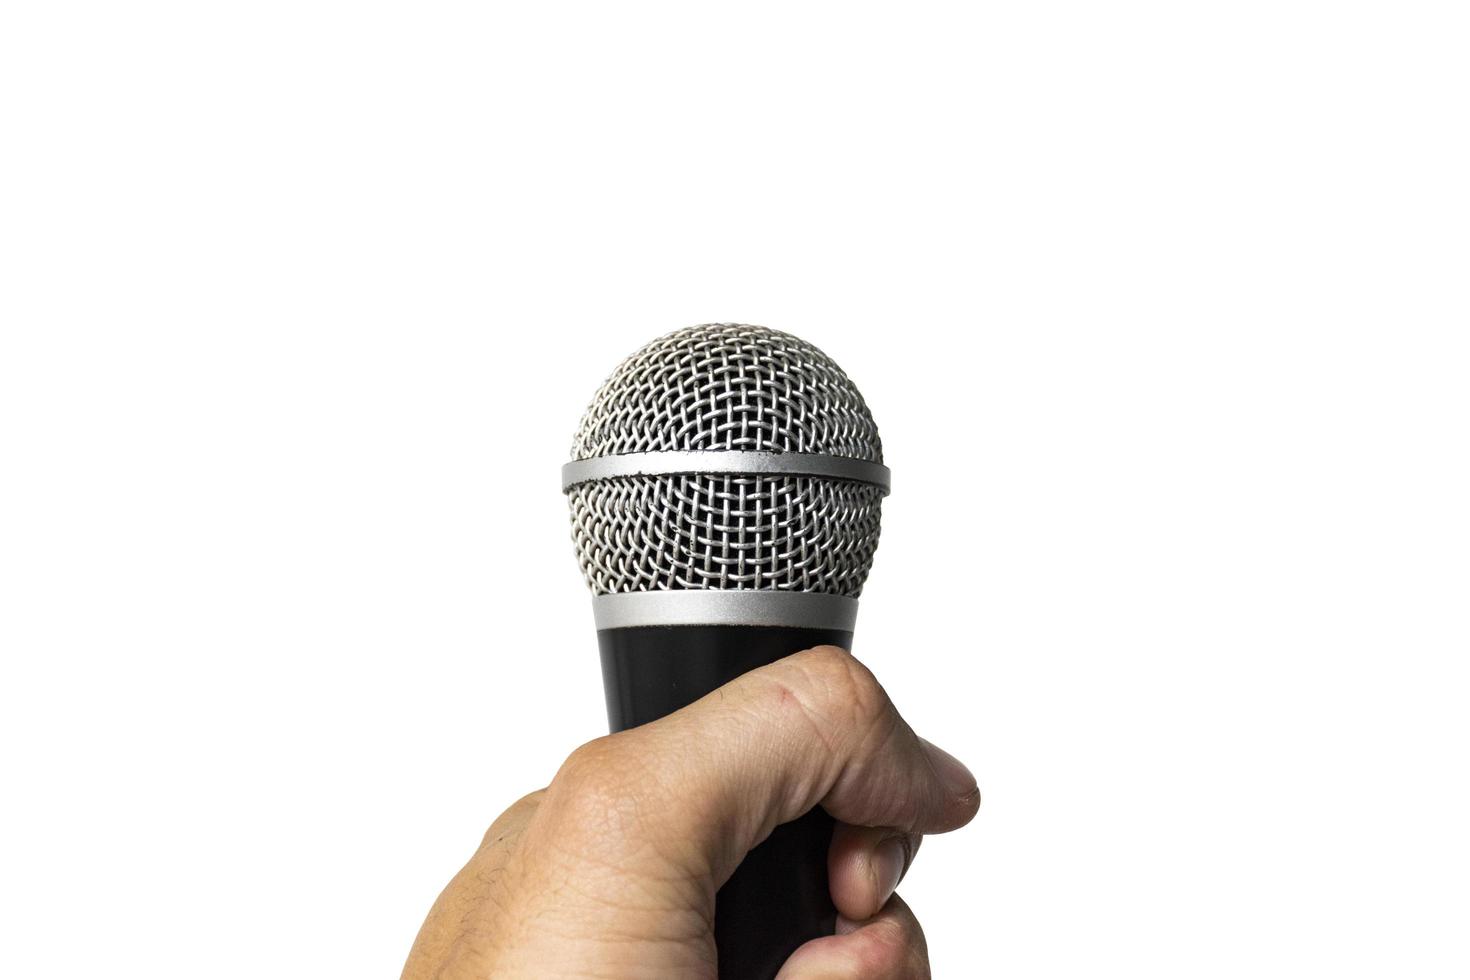 Hand holding a microphone isolated on white background photo